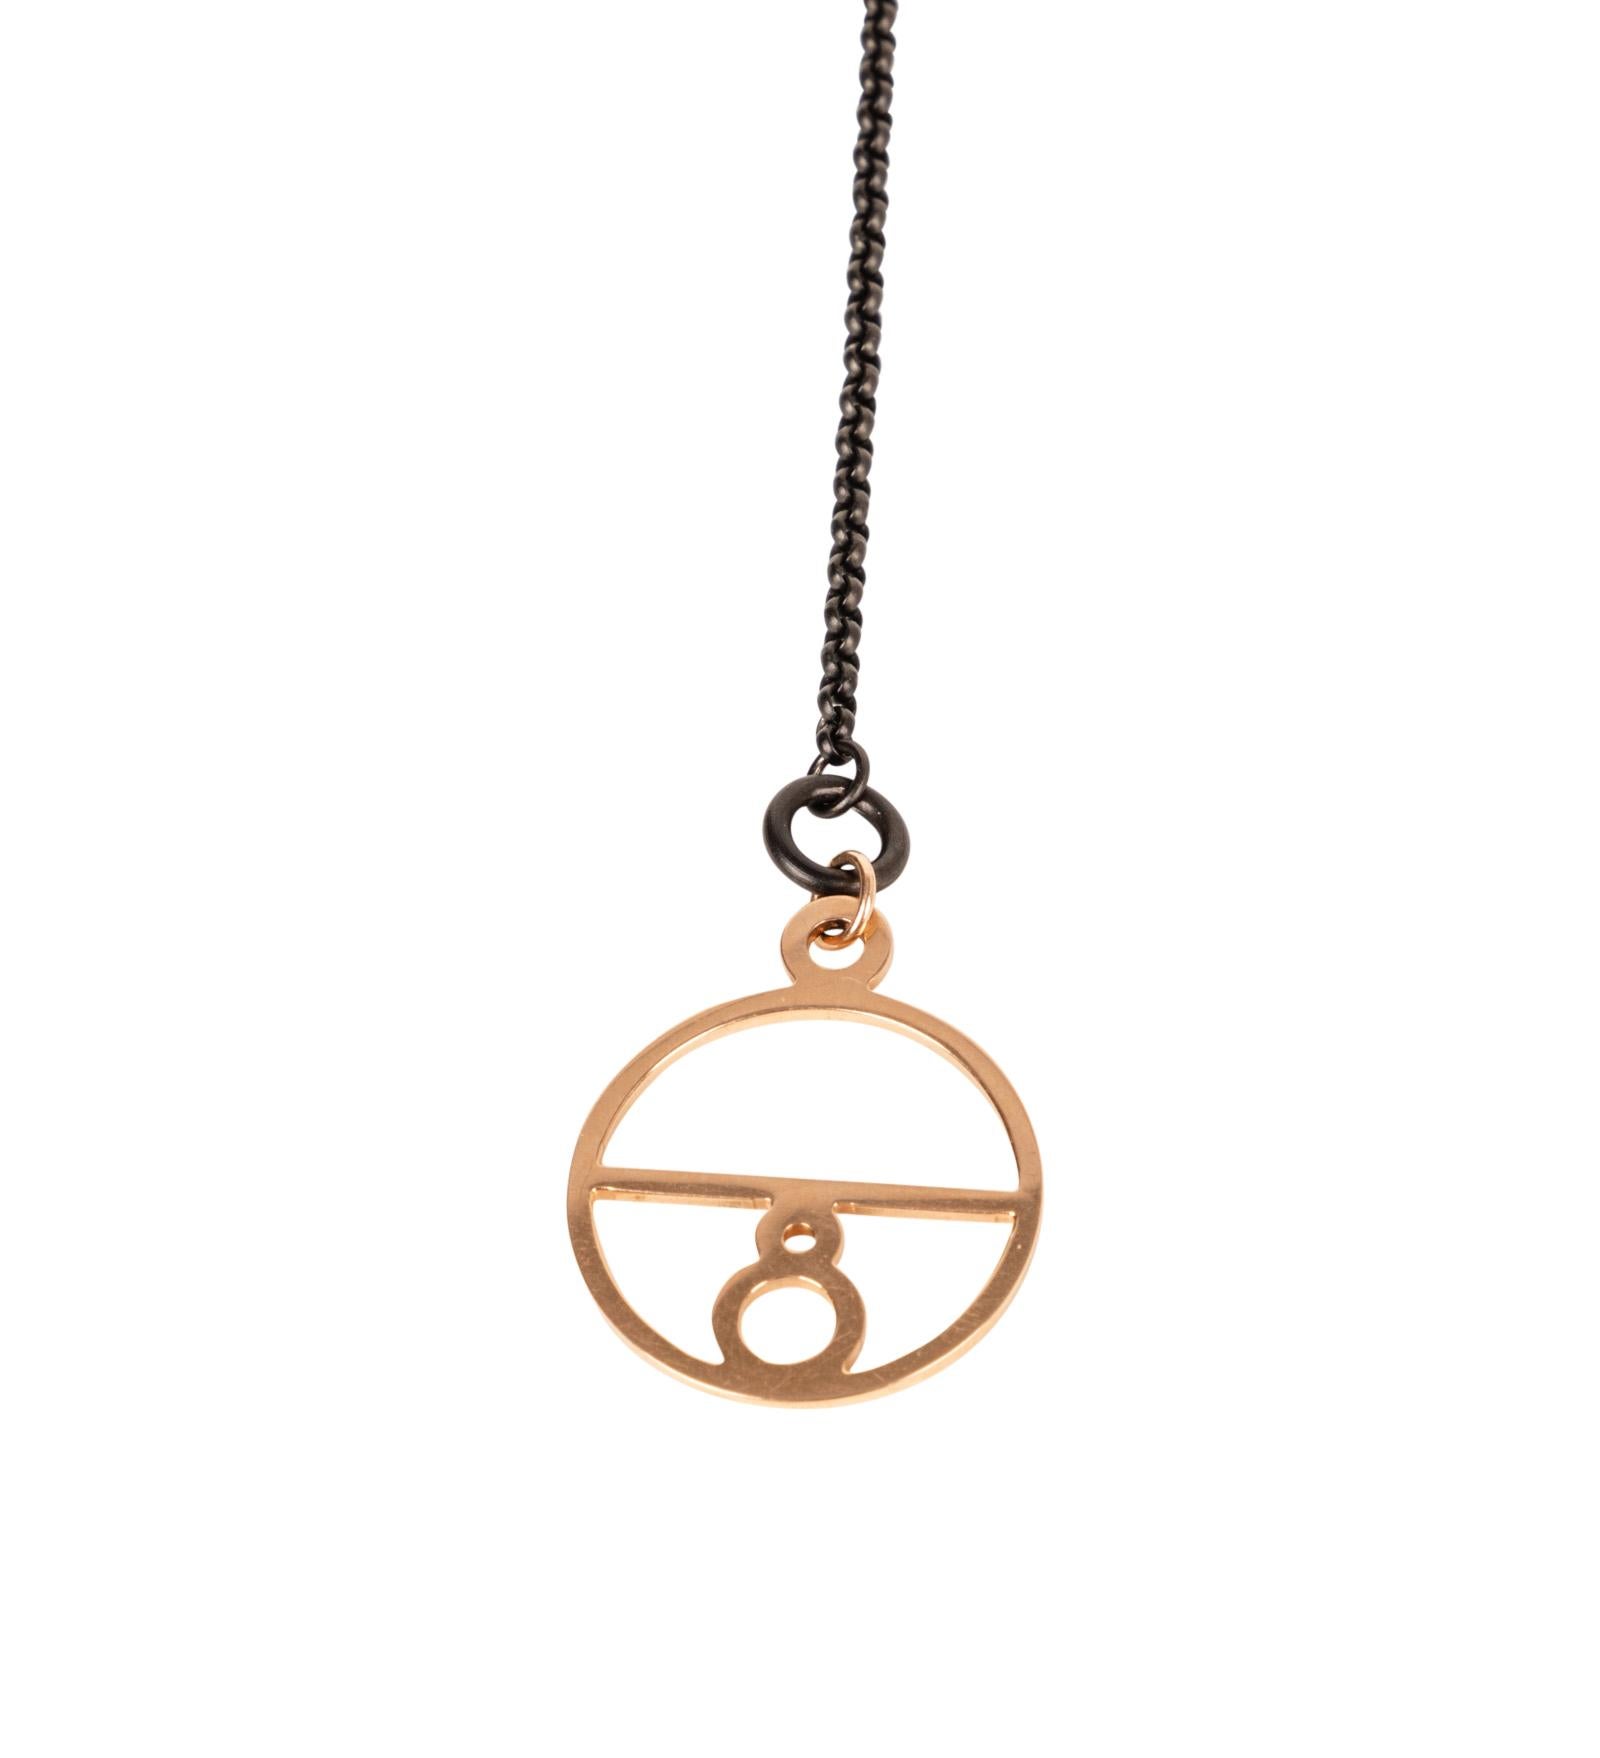 Women's Hermes Crazy Caleche Necklace Blackened Silver 18K Rose Gold Limited Edition For Sale